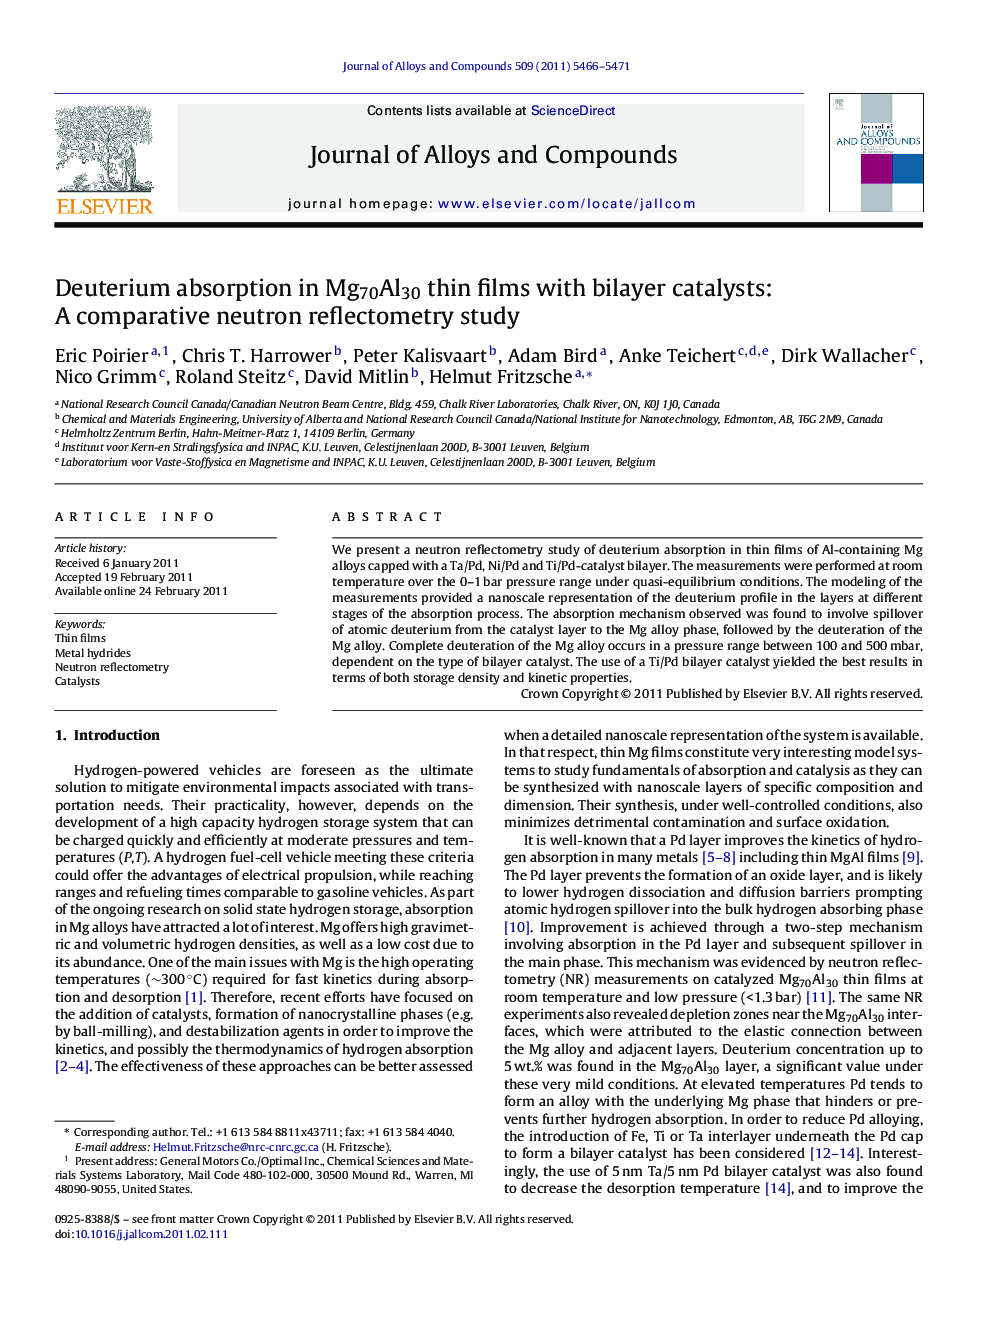 Deuterium absorption in Mg70Al30 thin films with bilayer catalysts: A comparative neutron reflectometry study